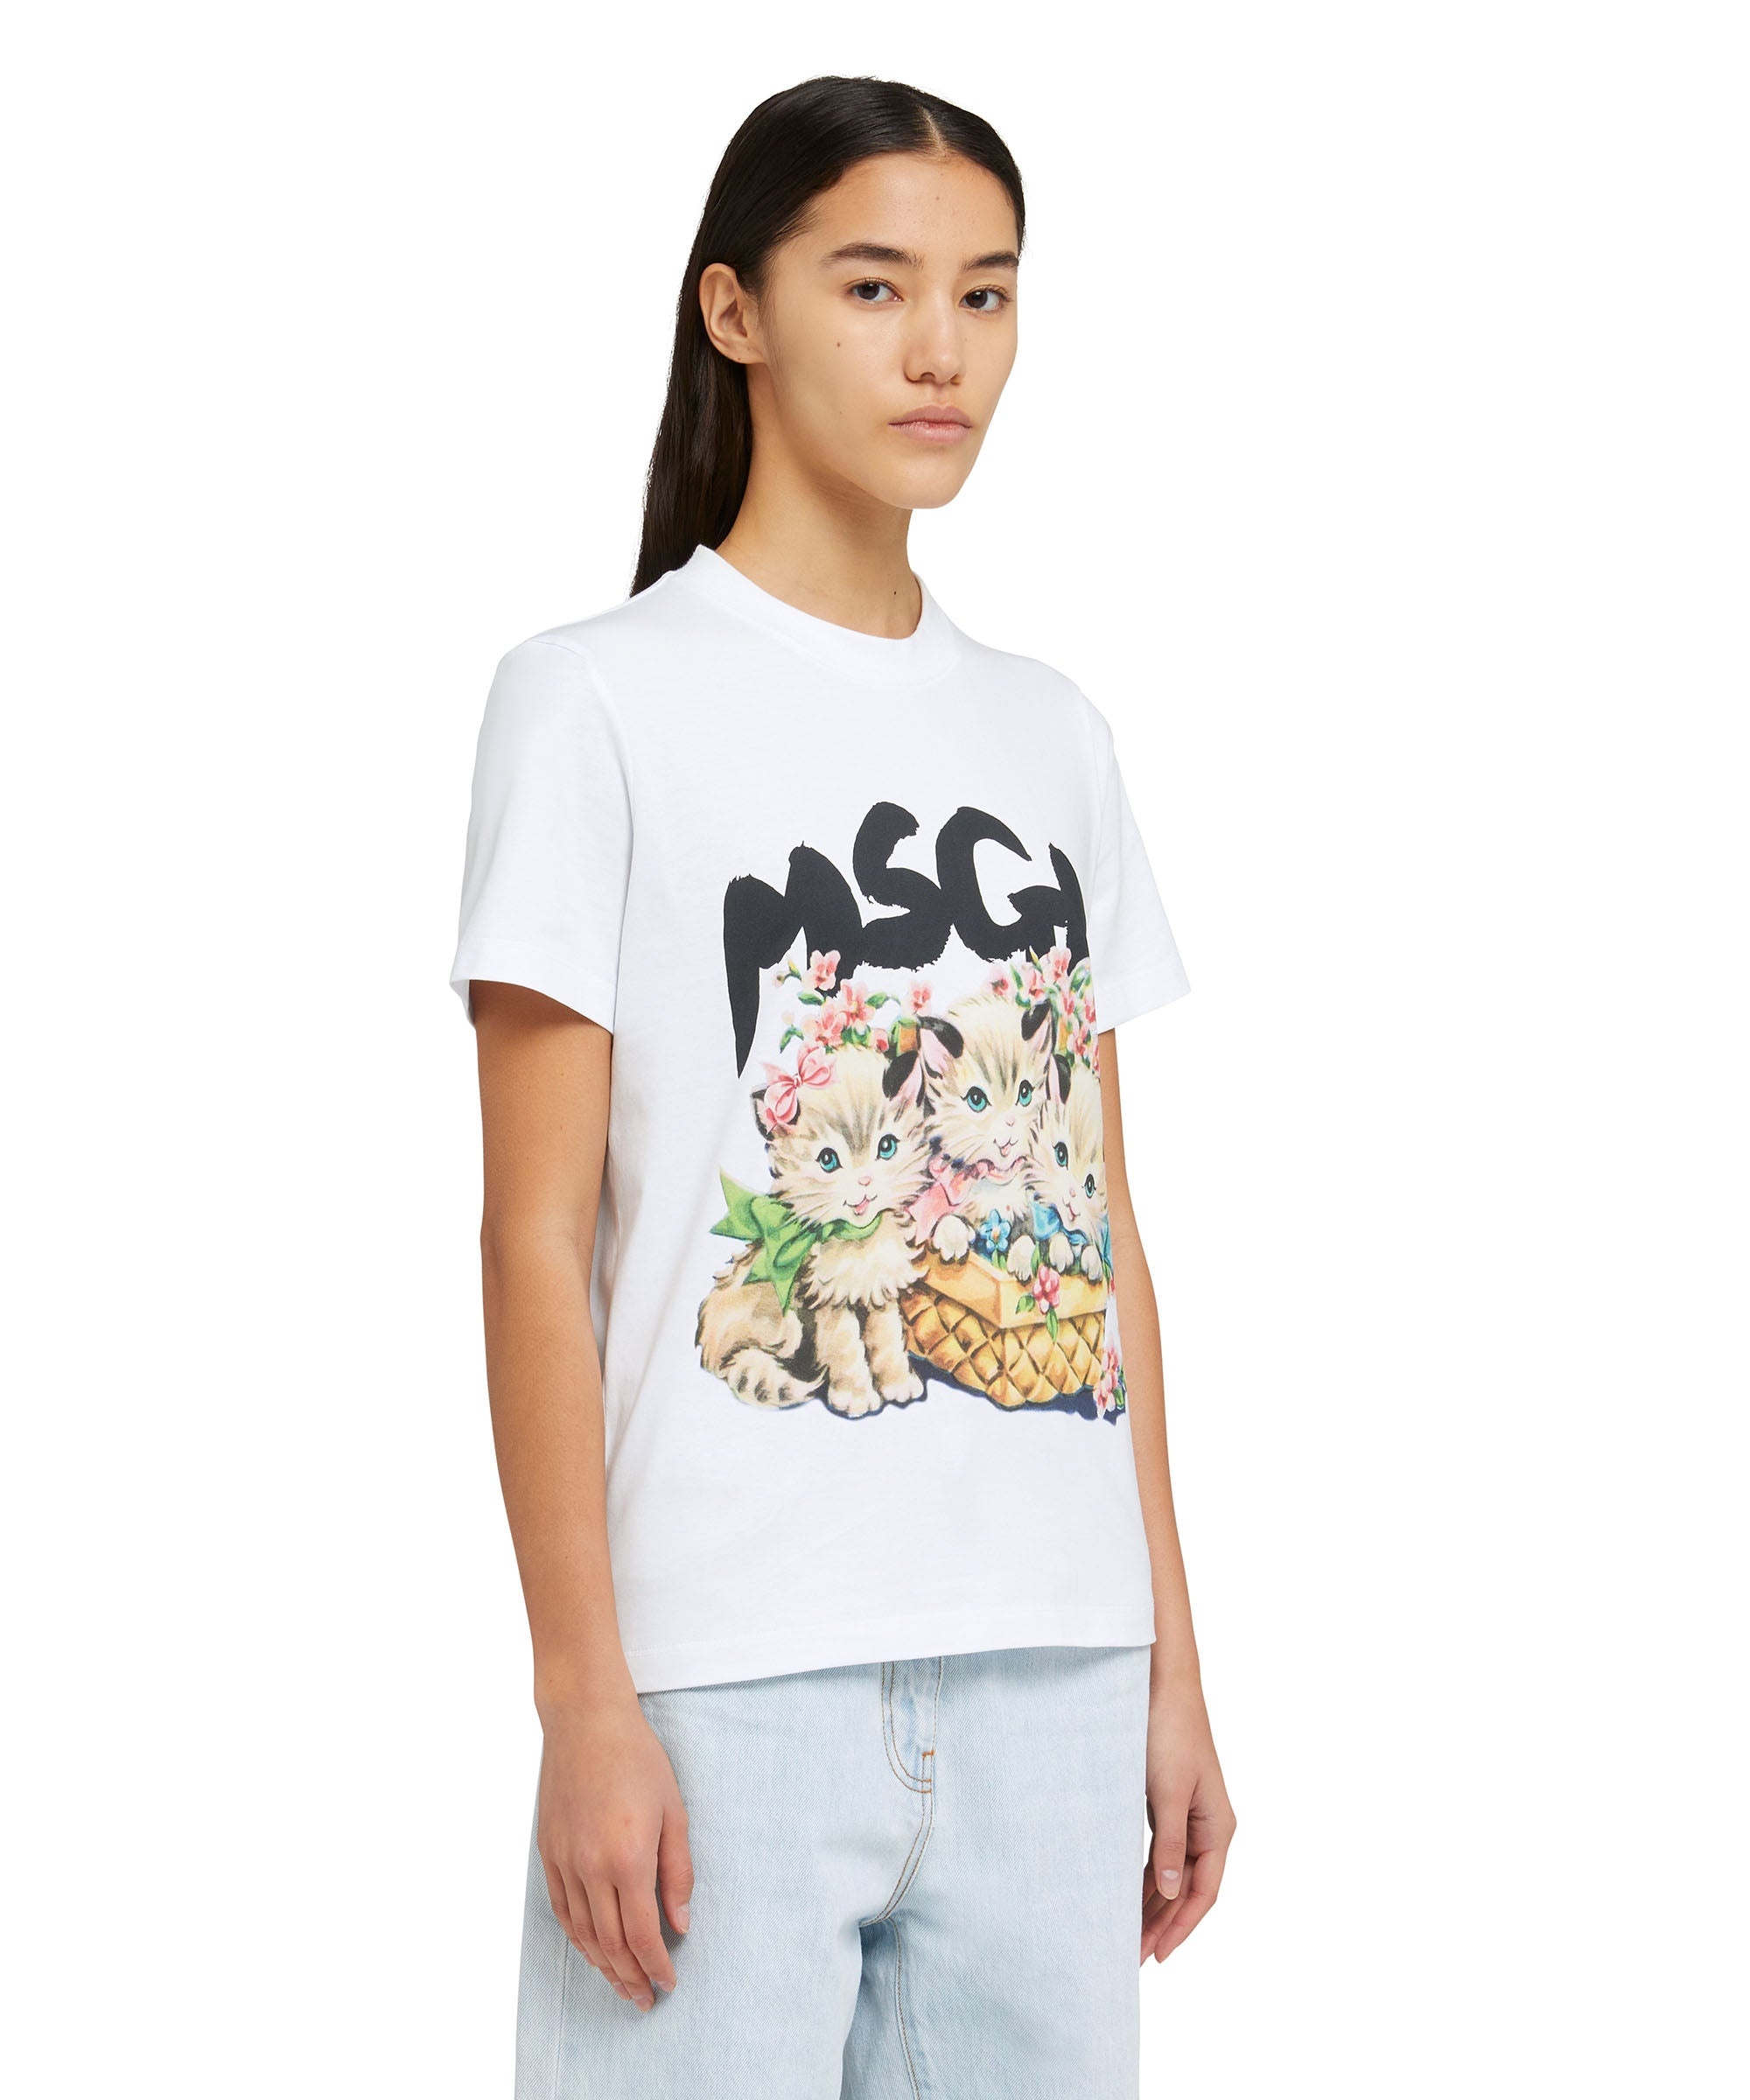 T-Shirt with "basket of cats" graphic - 4